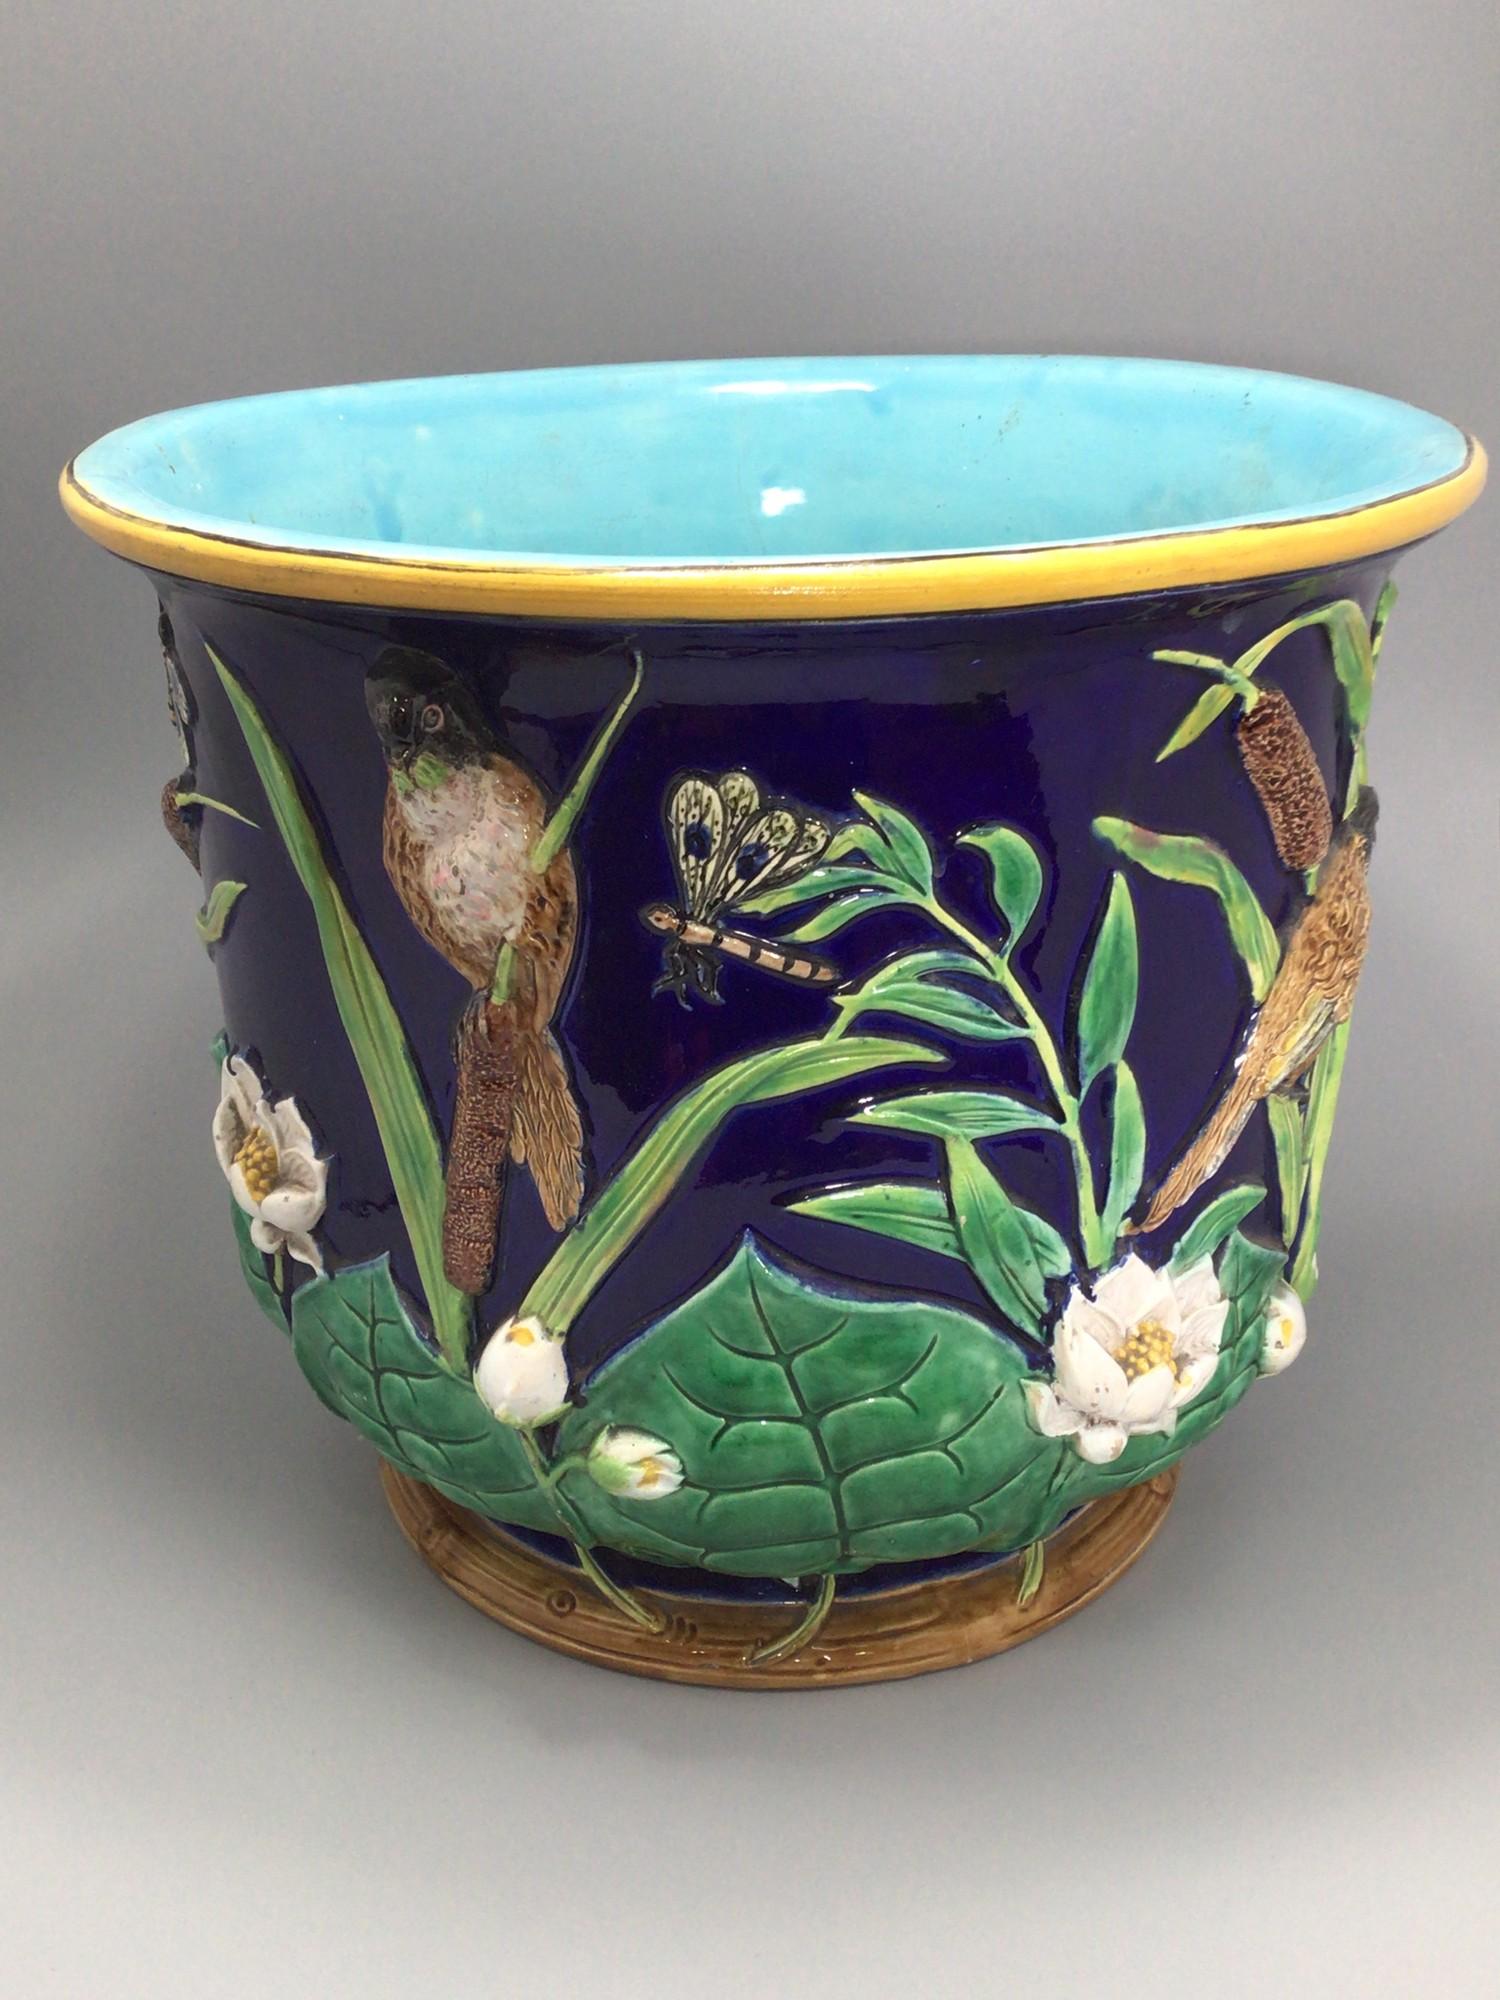 A 19th century Majolica pottery jardiniere, probably by George Jones, decorated in relief with birds